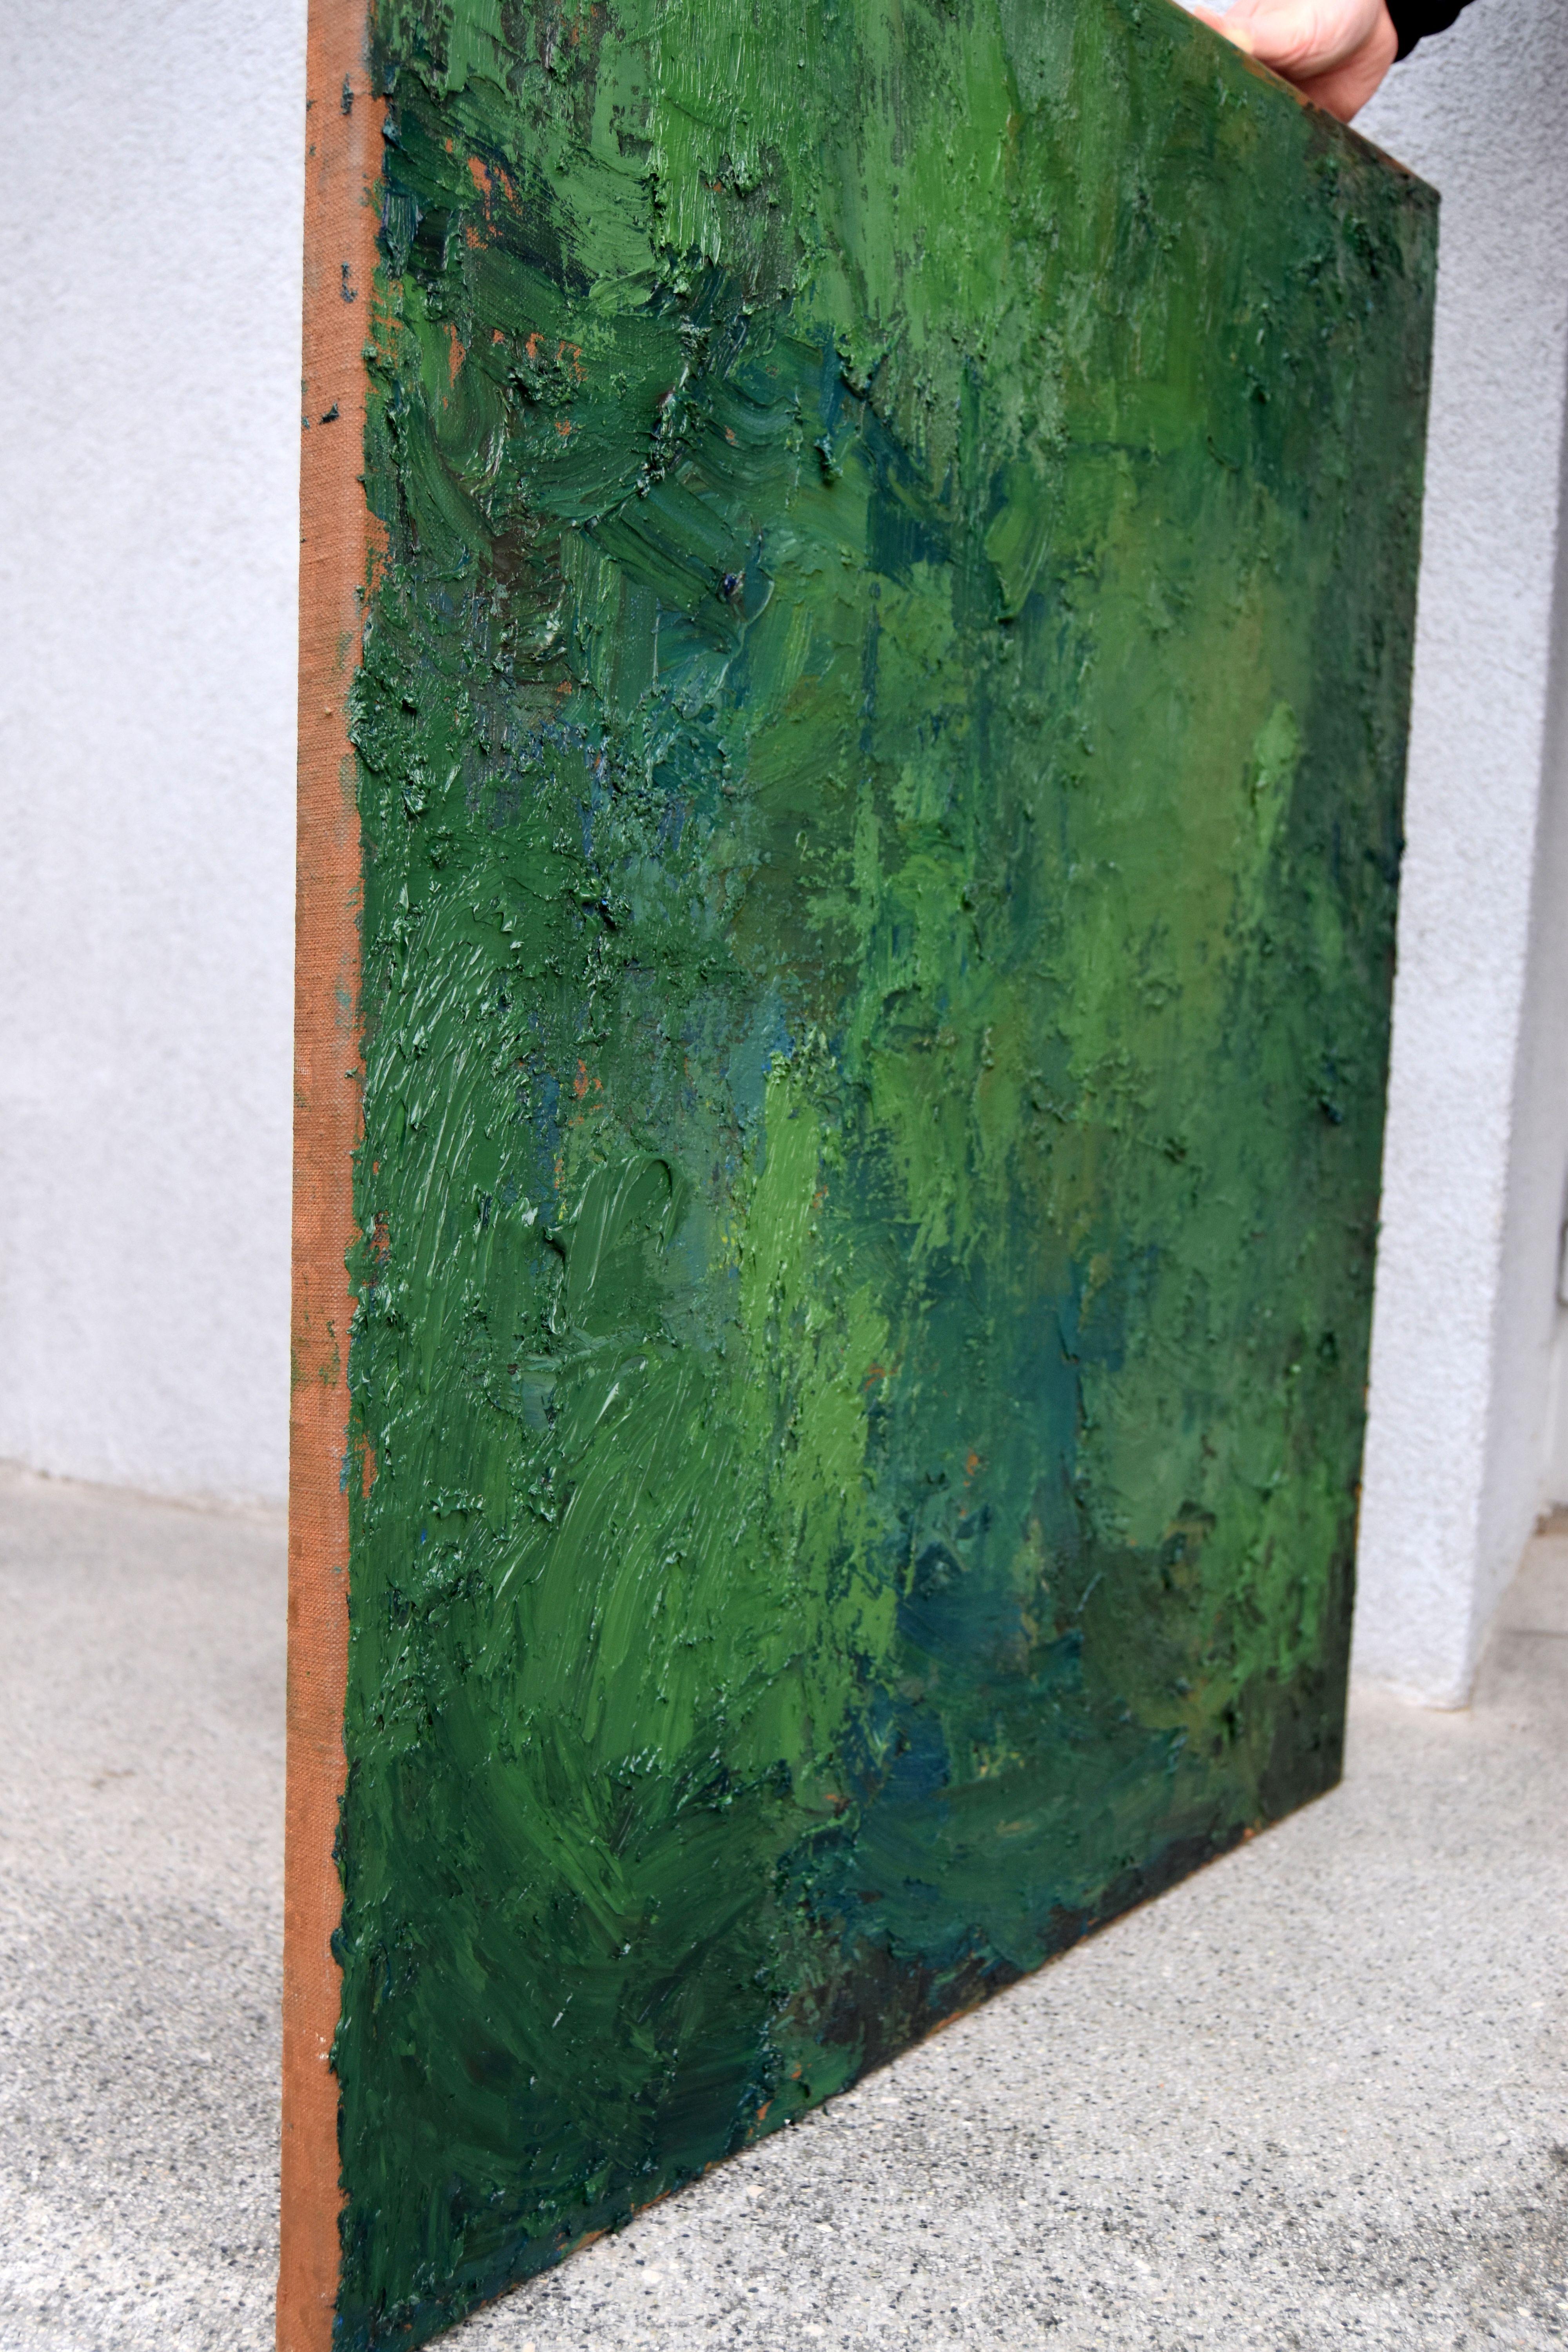 Incide of the green, Painting, Oil on Canvas - Green Abstract Painting by Roman Rembovsky